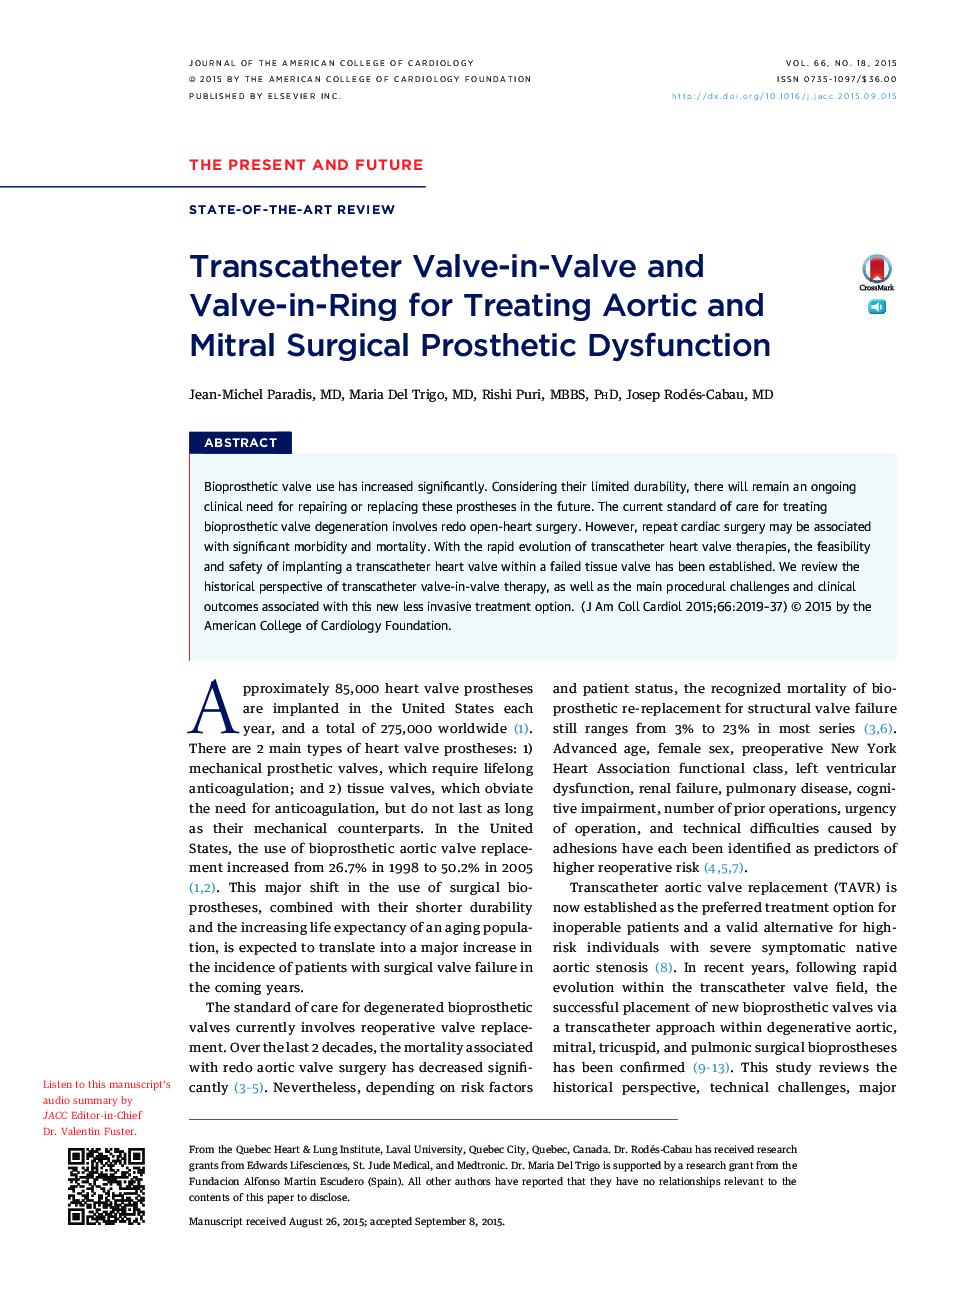 Transcatheter Valve-in-Valve and Valve-in-Ring for Treating Aortic and MitralÂ Surgical Prosthetic Dysfunction